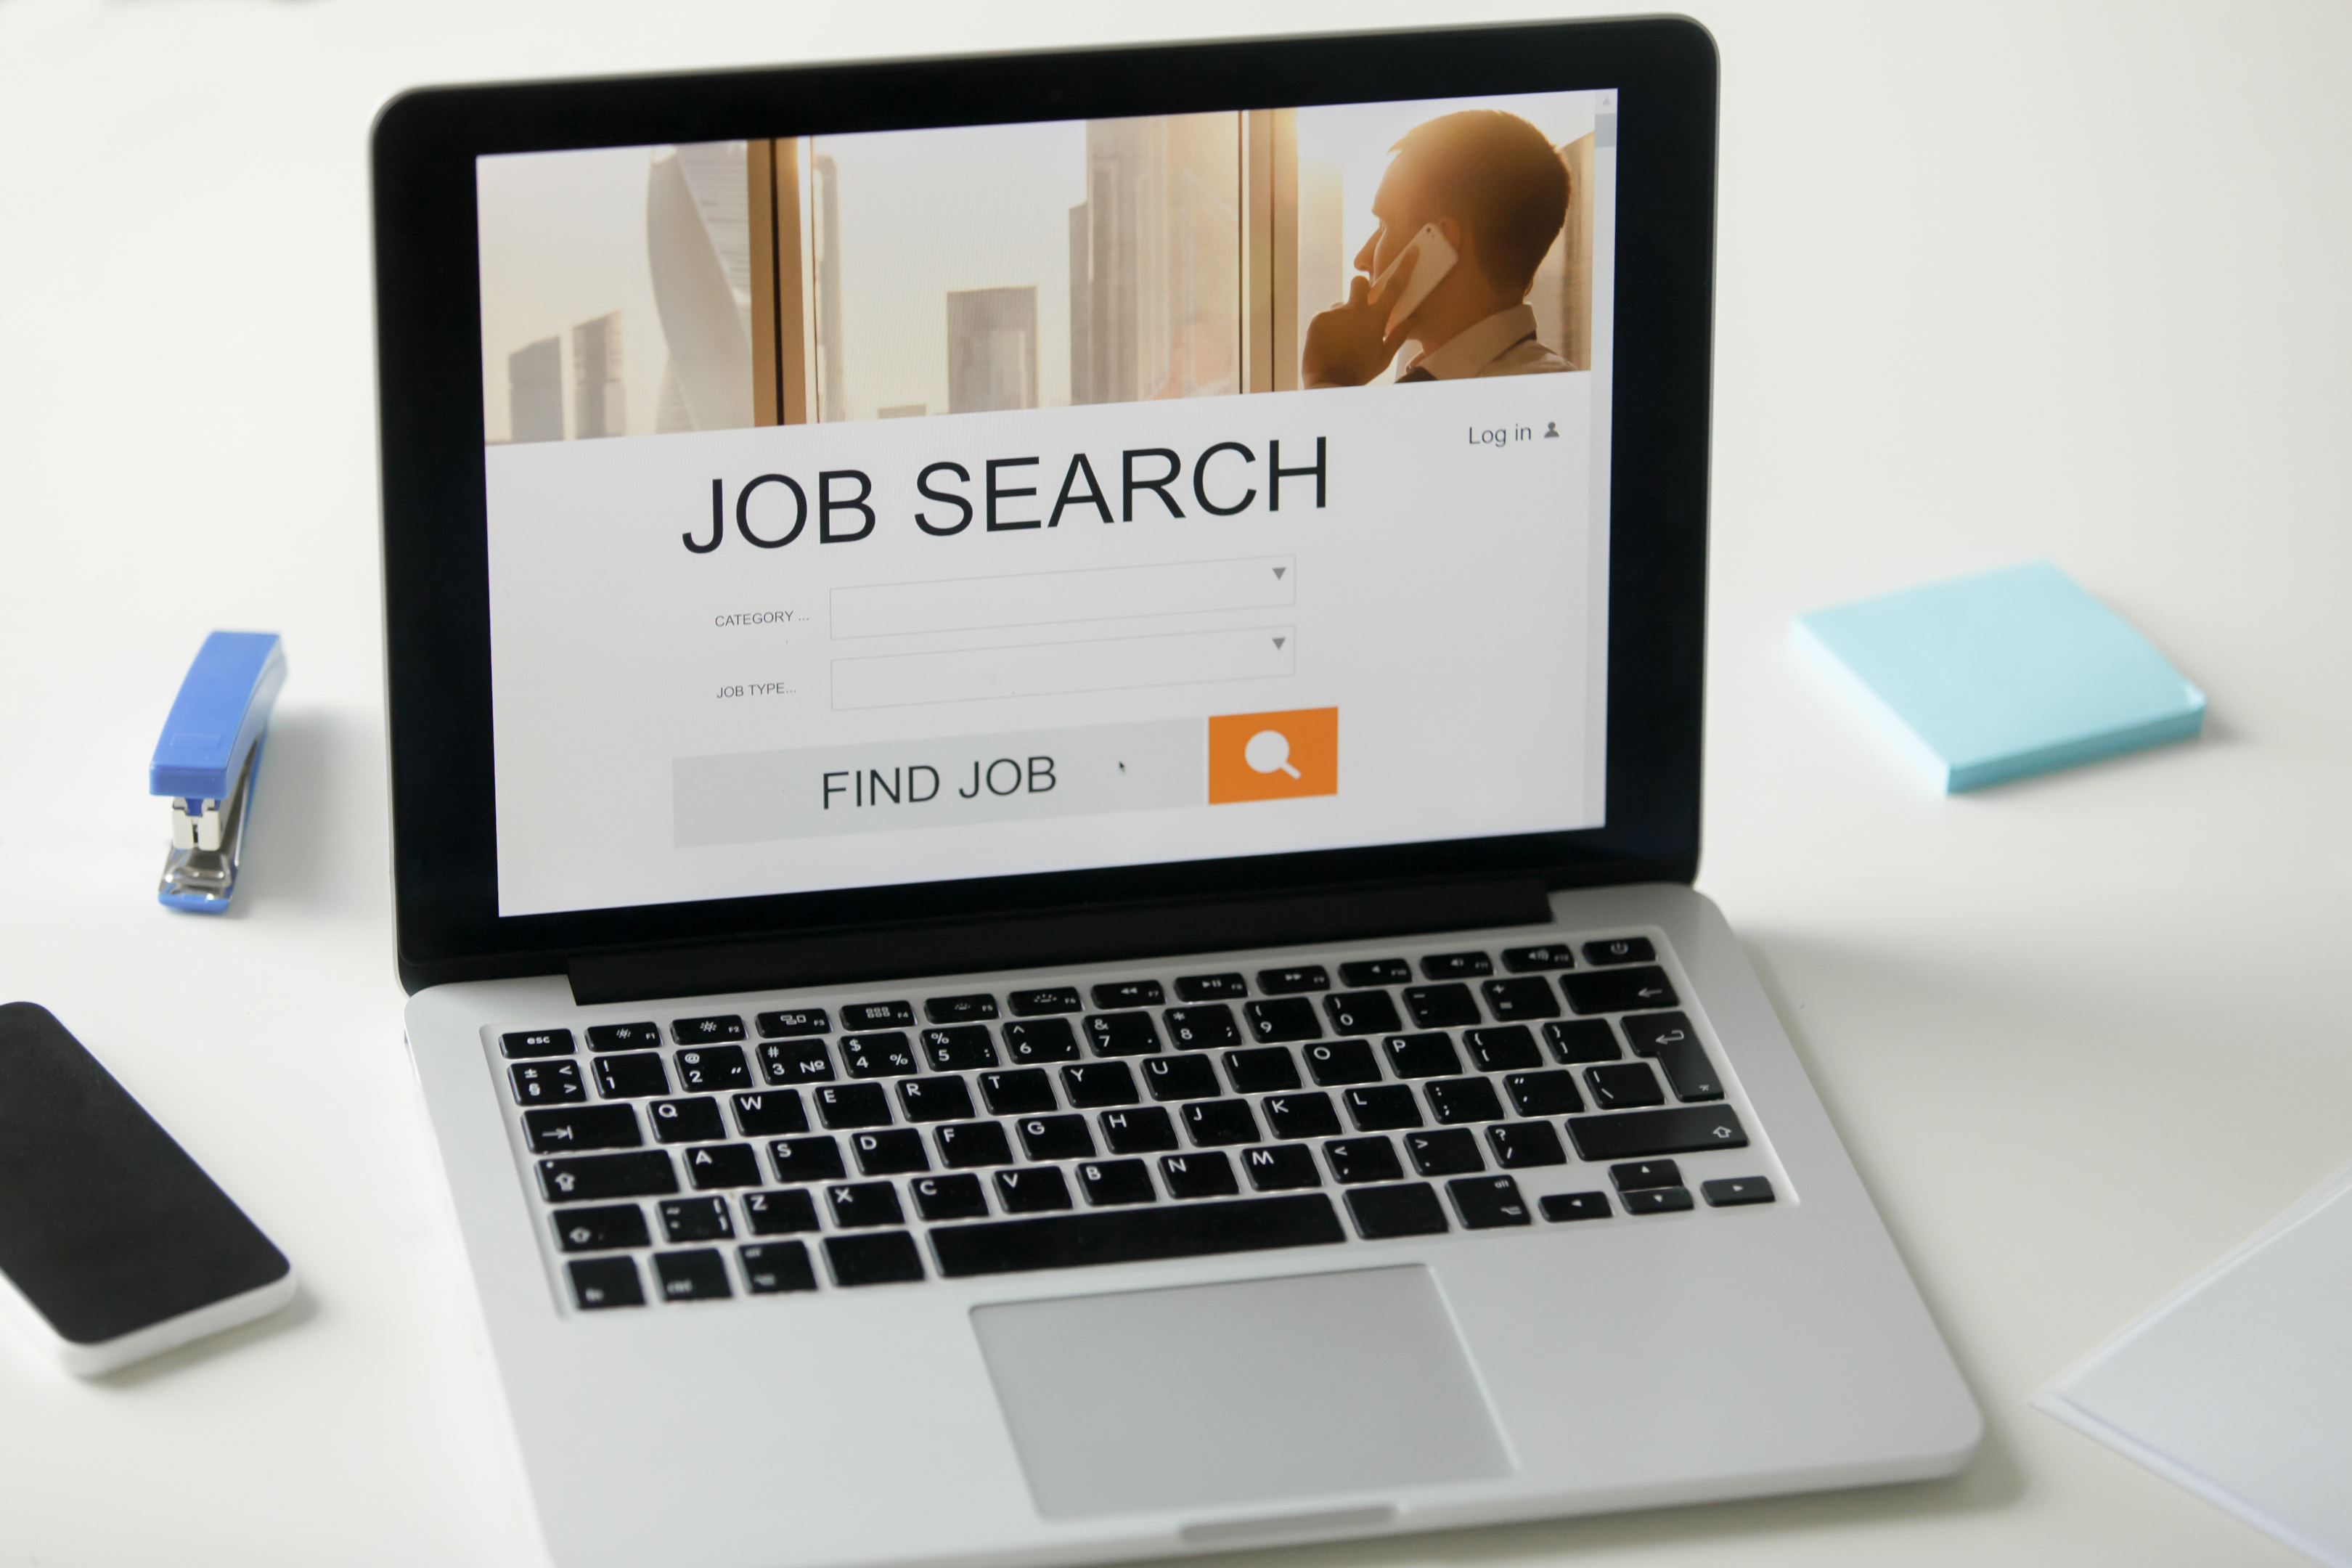 https://www.freepik.com/free-photo/open-laptop-desk-job-search-title-screen_1281122.htm#query=online%20job%20boards&position=8&from_view=search&track=ais